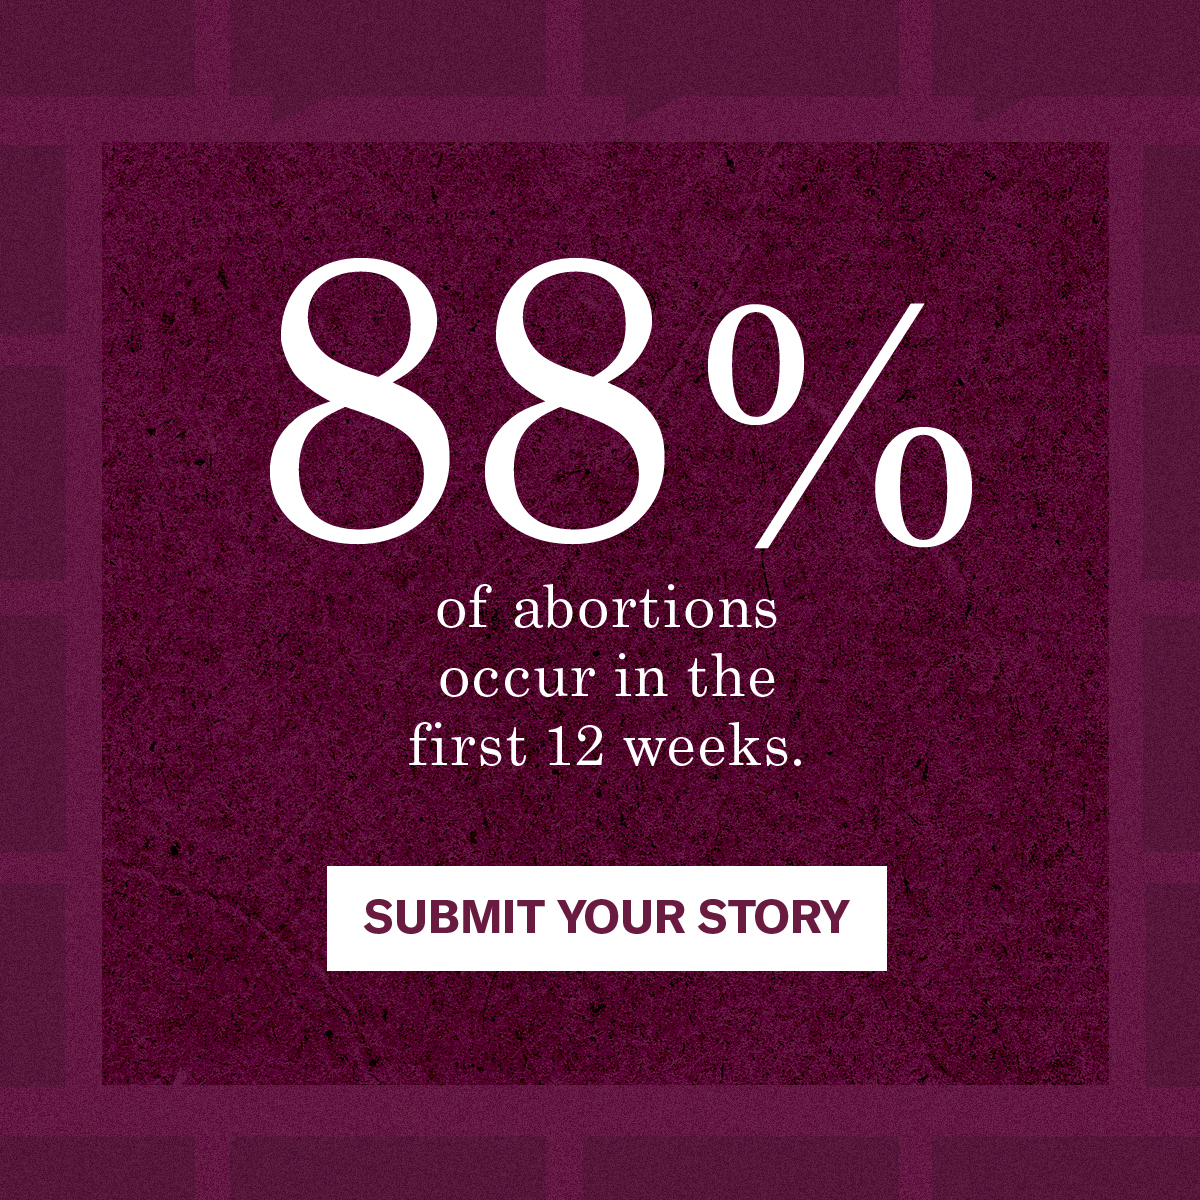 88% of abortions occur in the first 12 weeks.